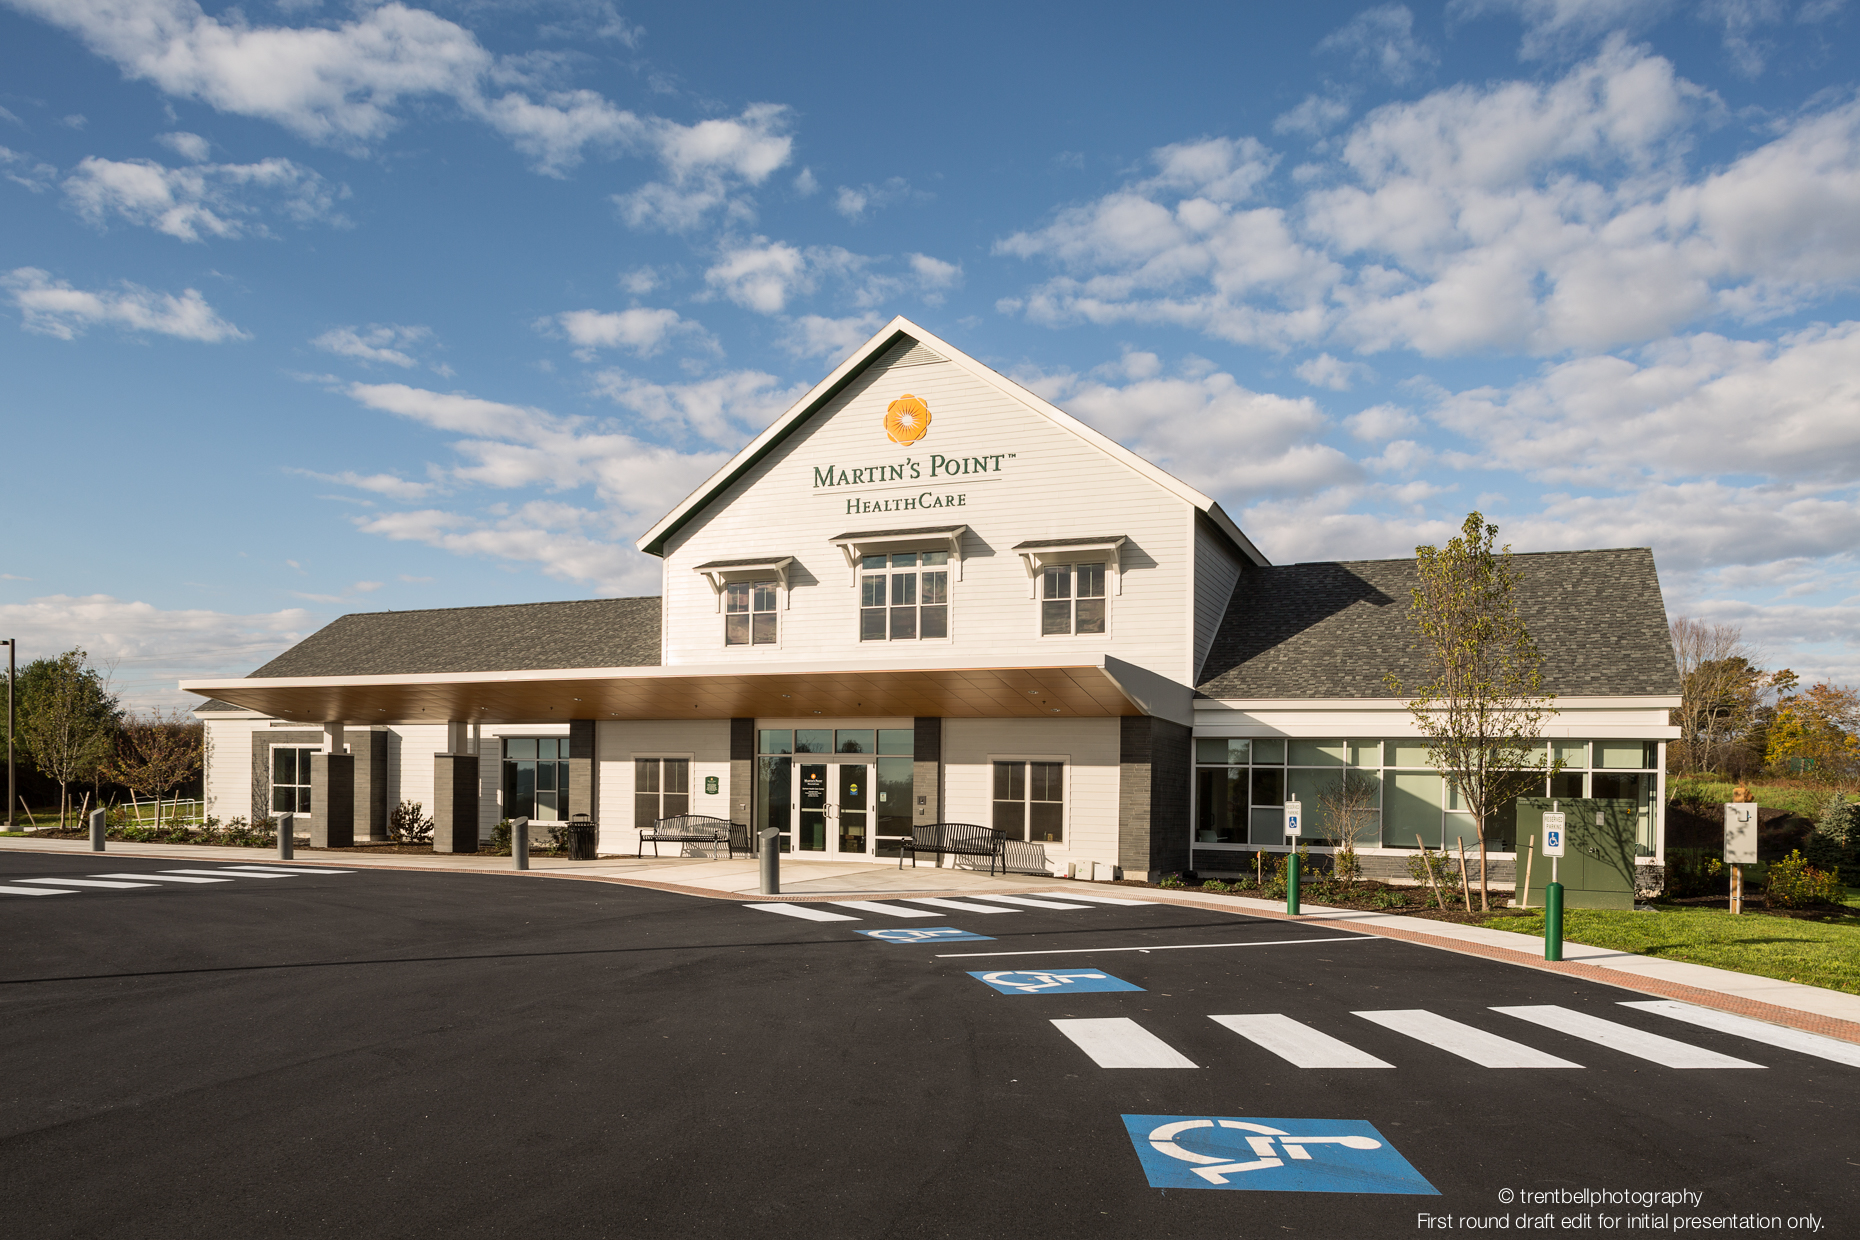 7 Considerations for Planning Outpatient Facilities in a Post-COVID Care Environment